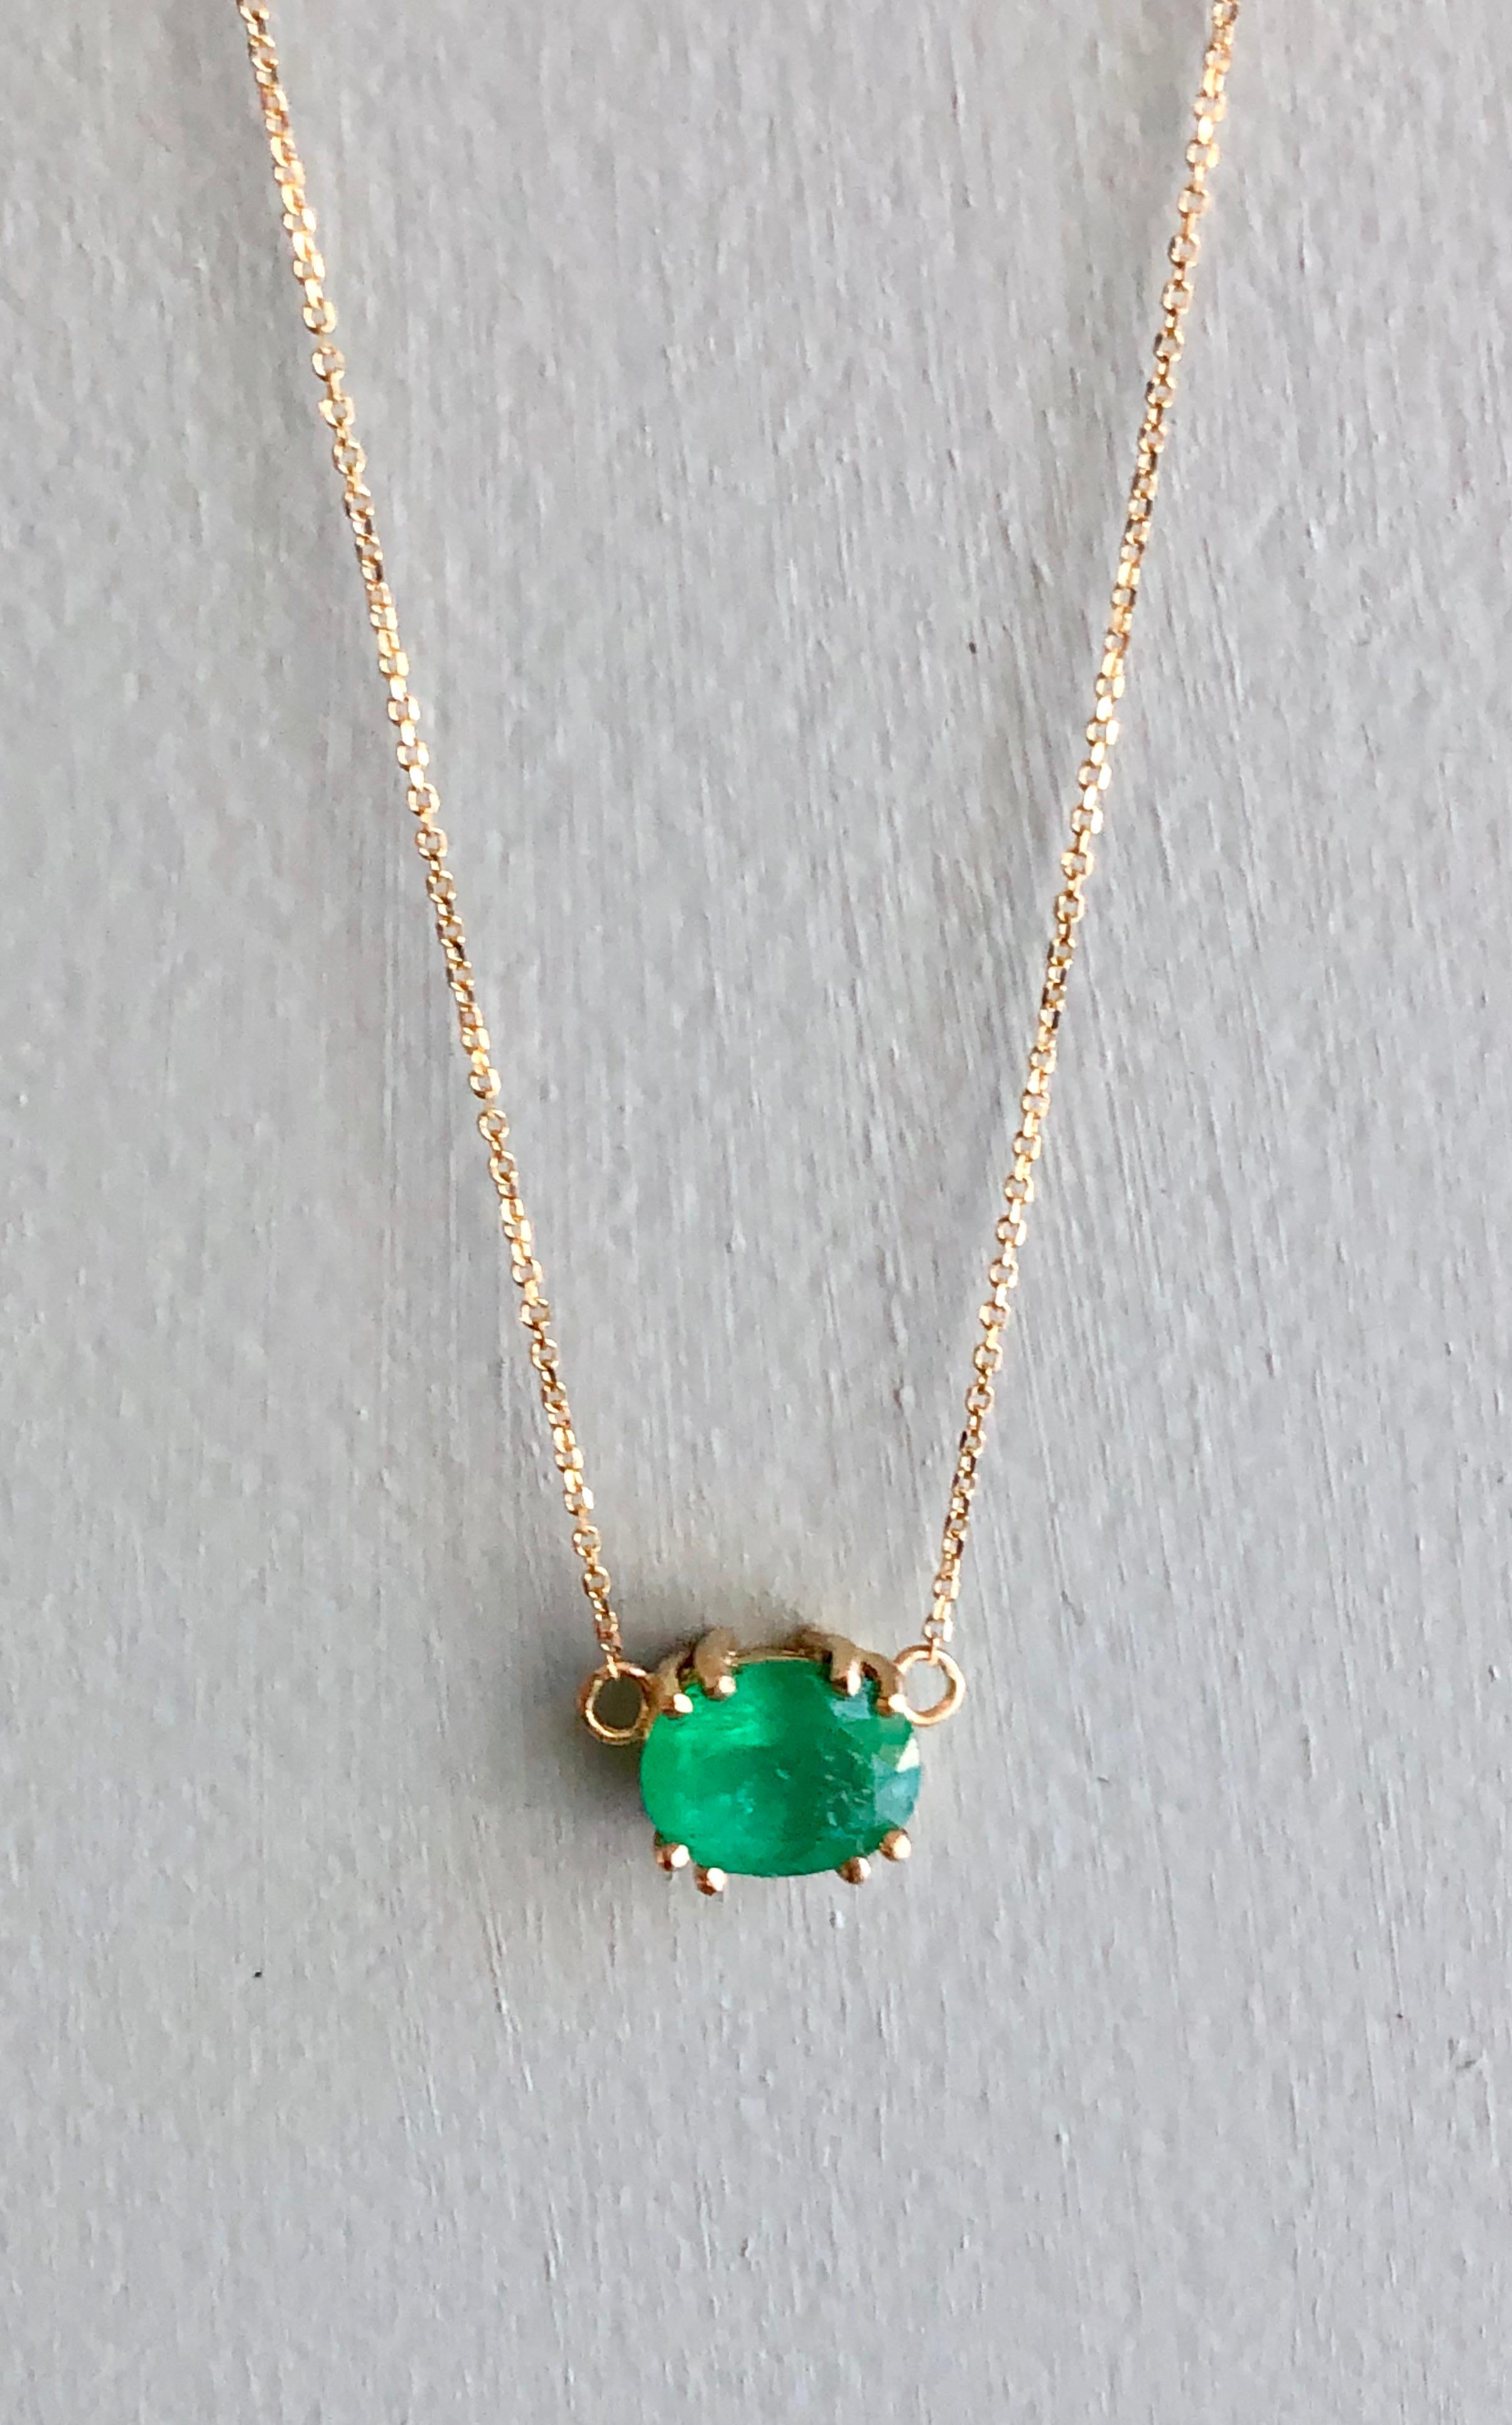 Stylish Pendant Necklace Natural Colombian Emerald  18K Yellow Gold 20in
Featuring a natural Colombian emerald oval cut, with visible natural inclusions, 3.50 carat, the emerald measurements 9.00x11.00mm, displaying a vivid medium green color. 
18K